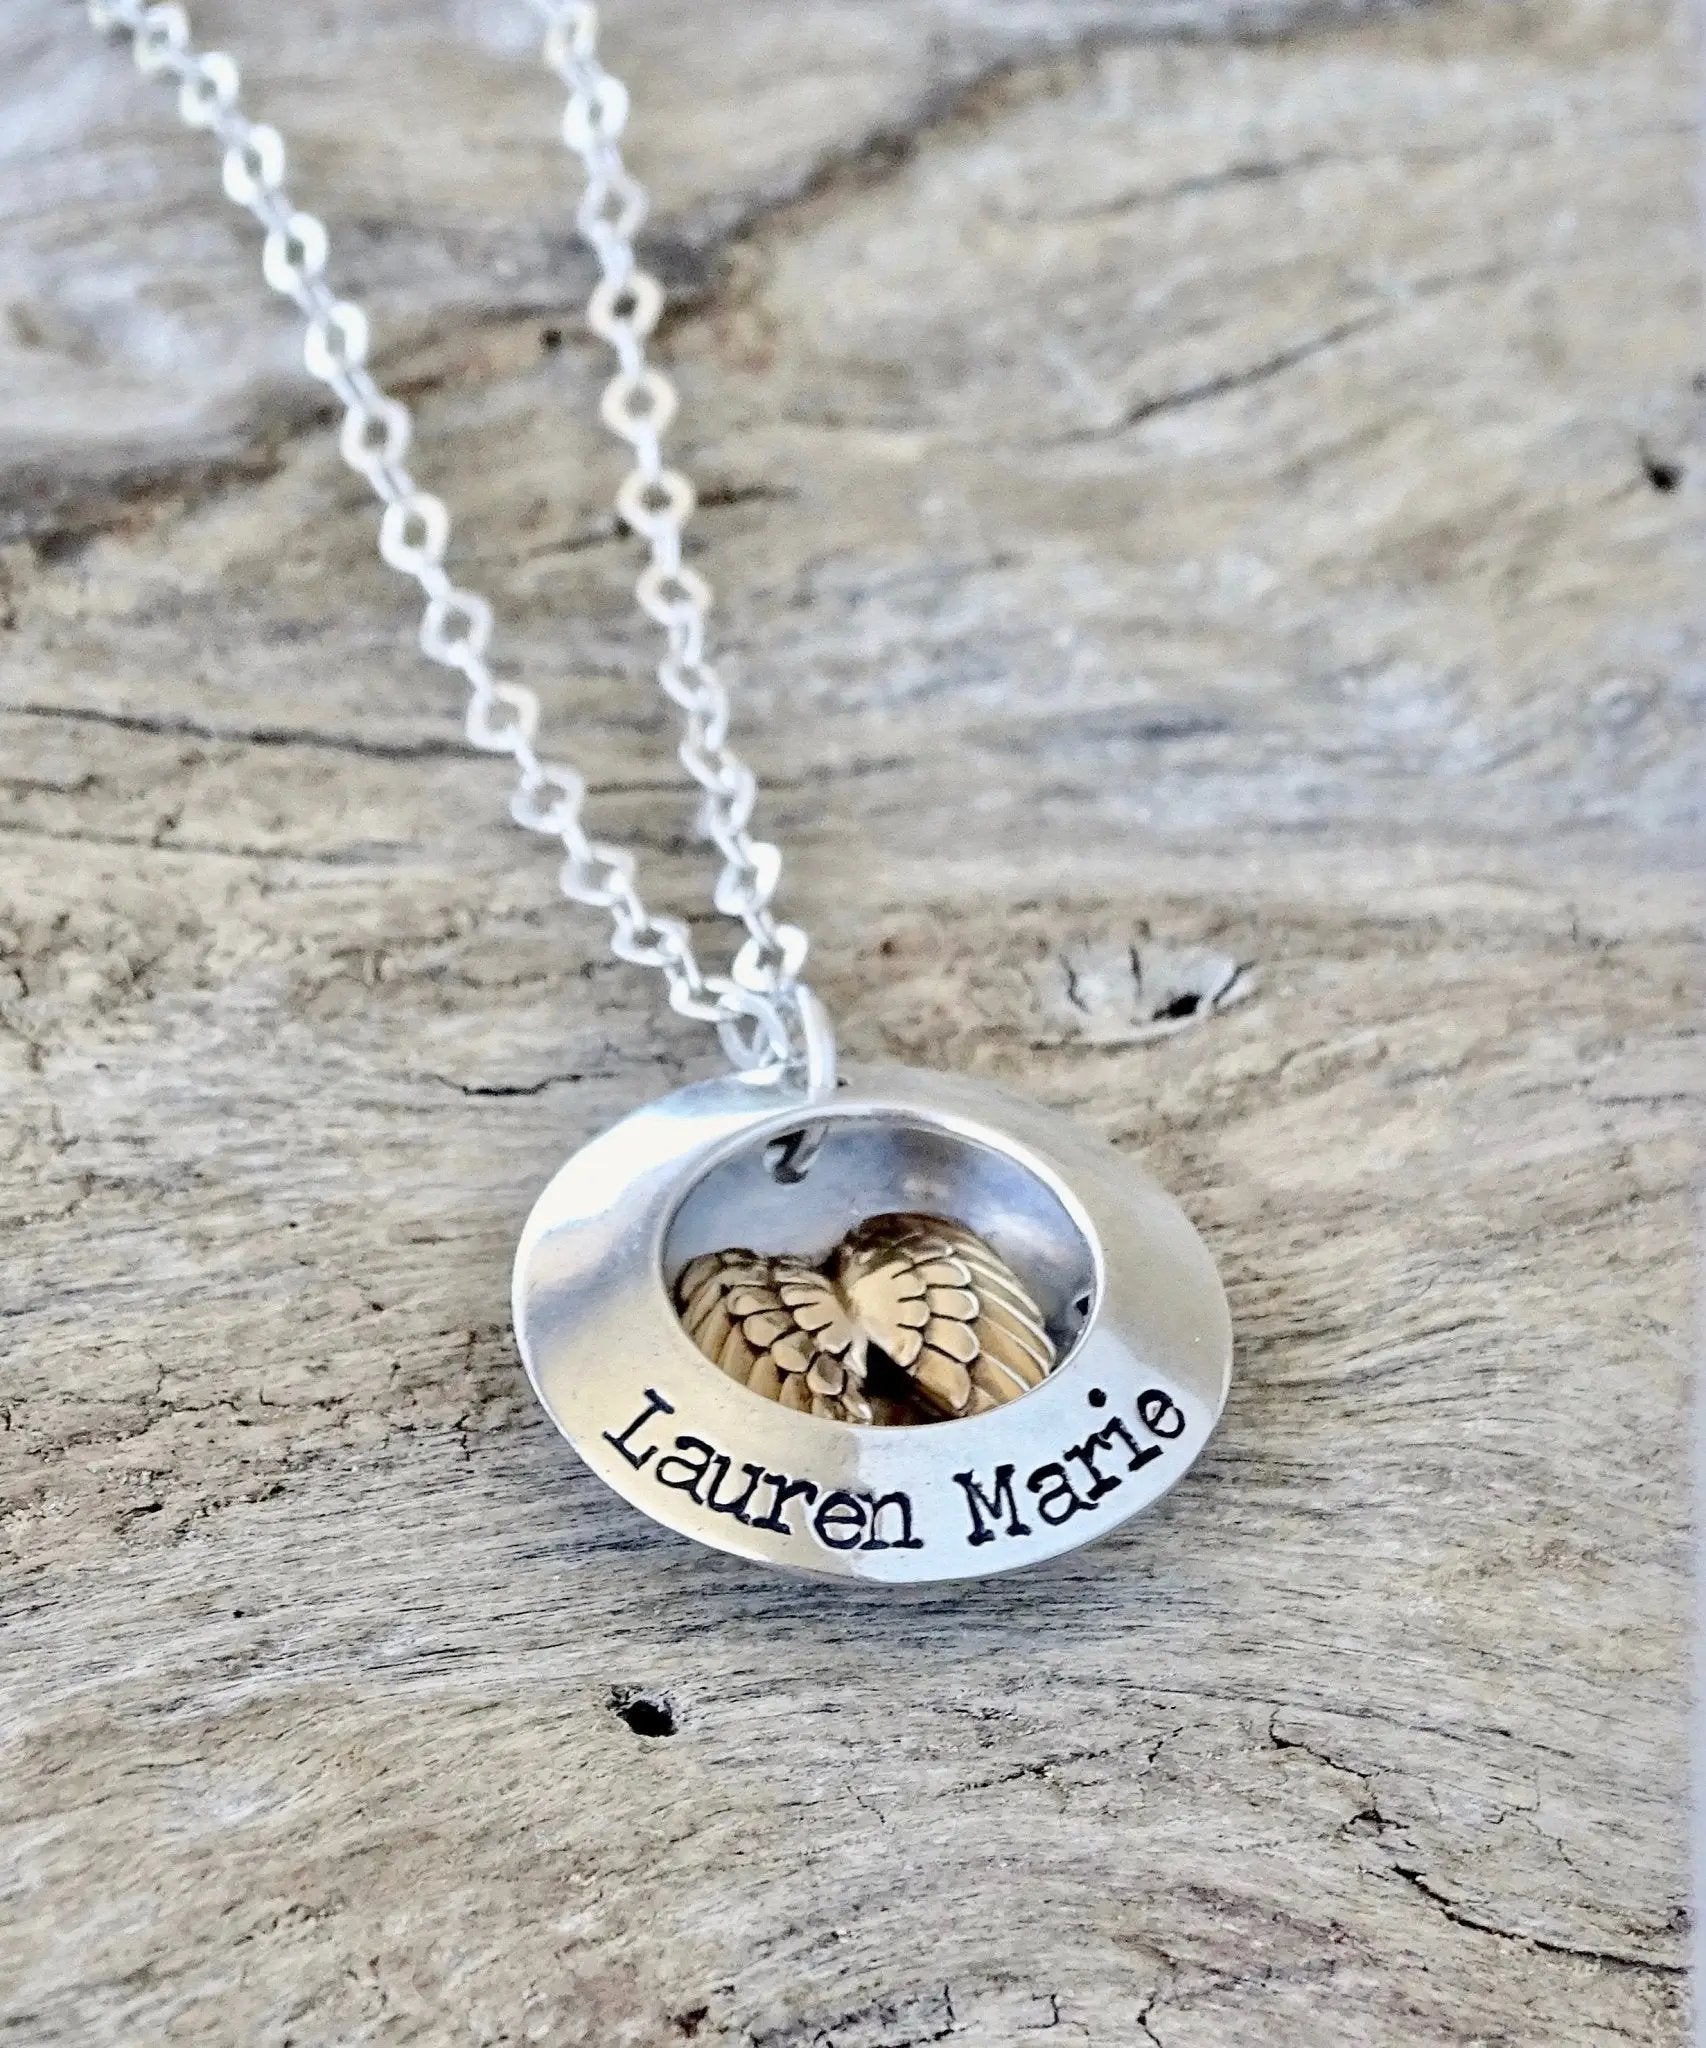 Jewelry For Moms Who Have Lost a Child